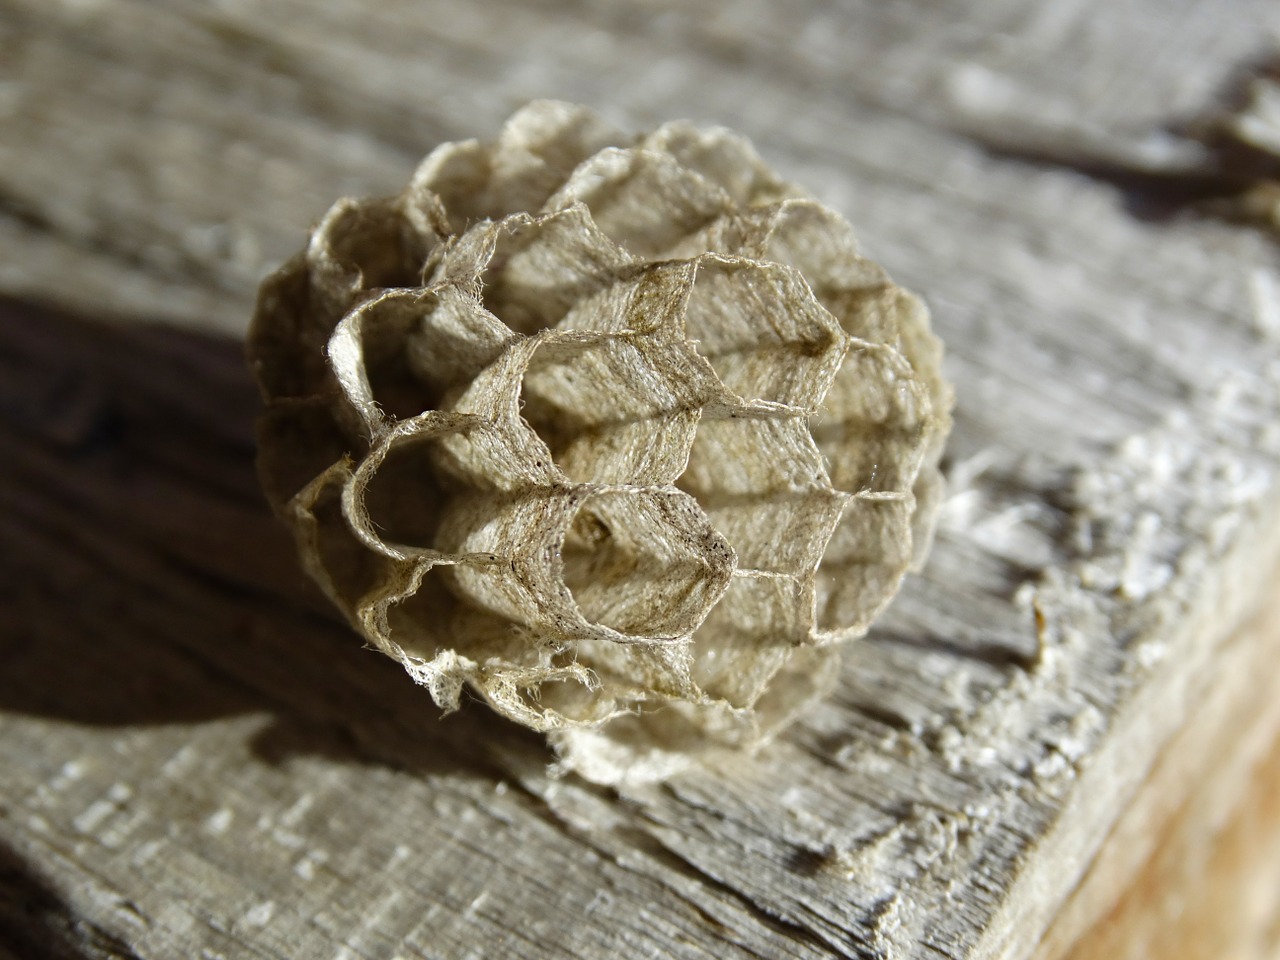 wasp-combs the hive wasps product free photo